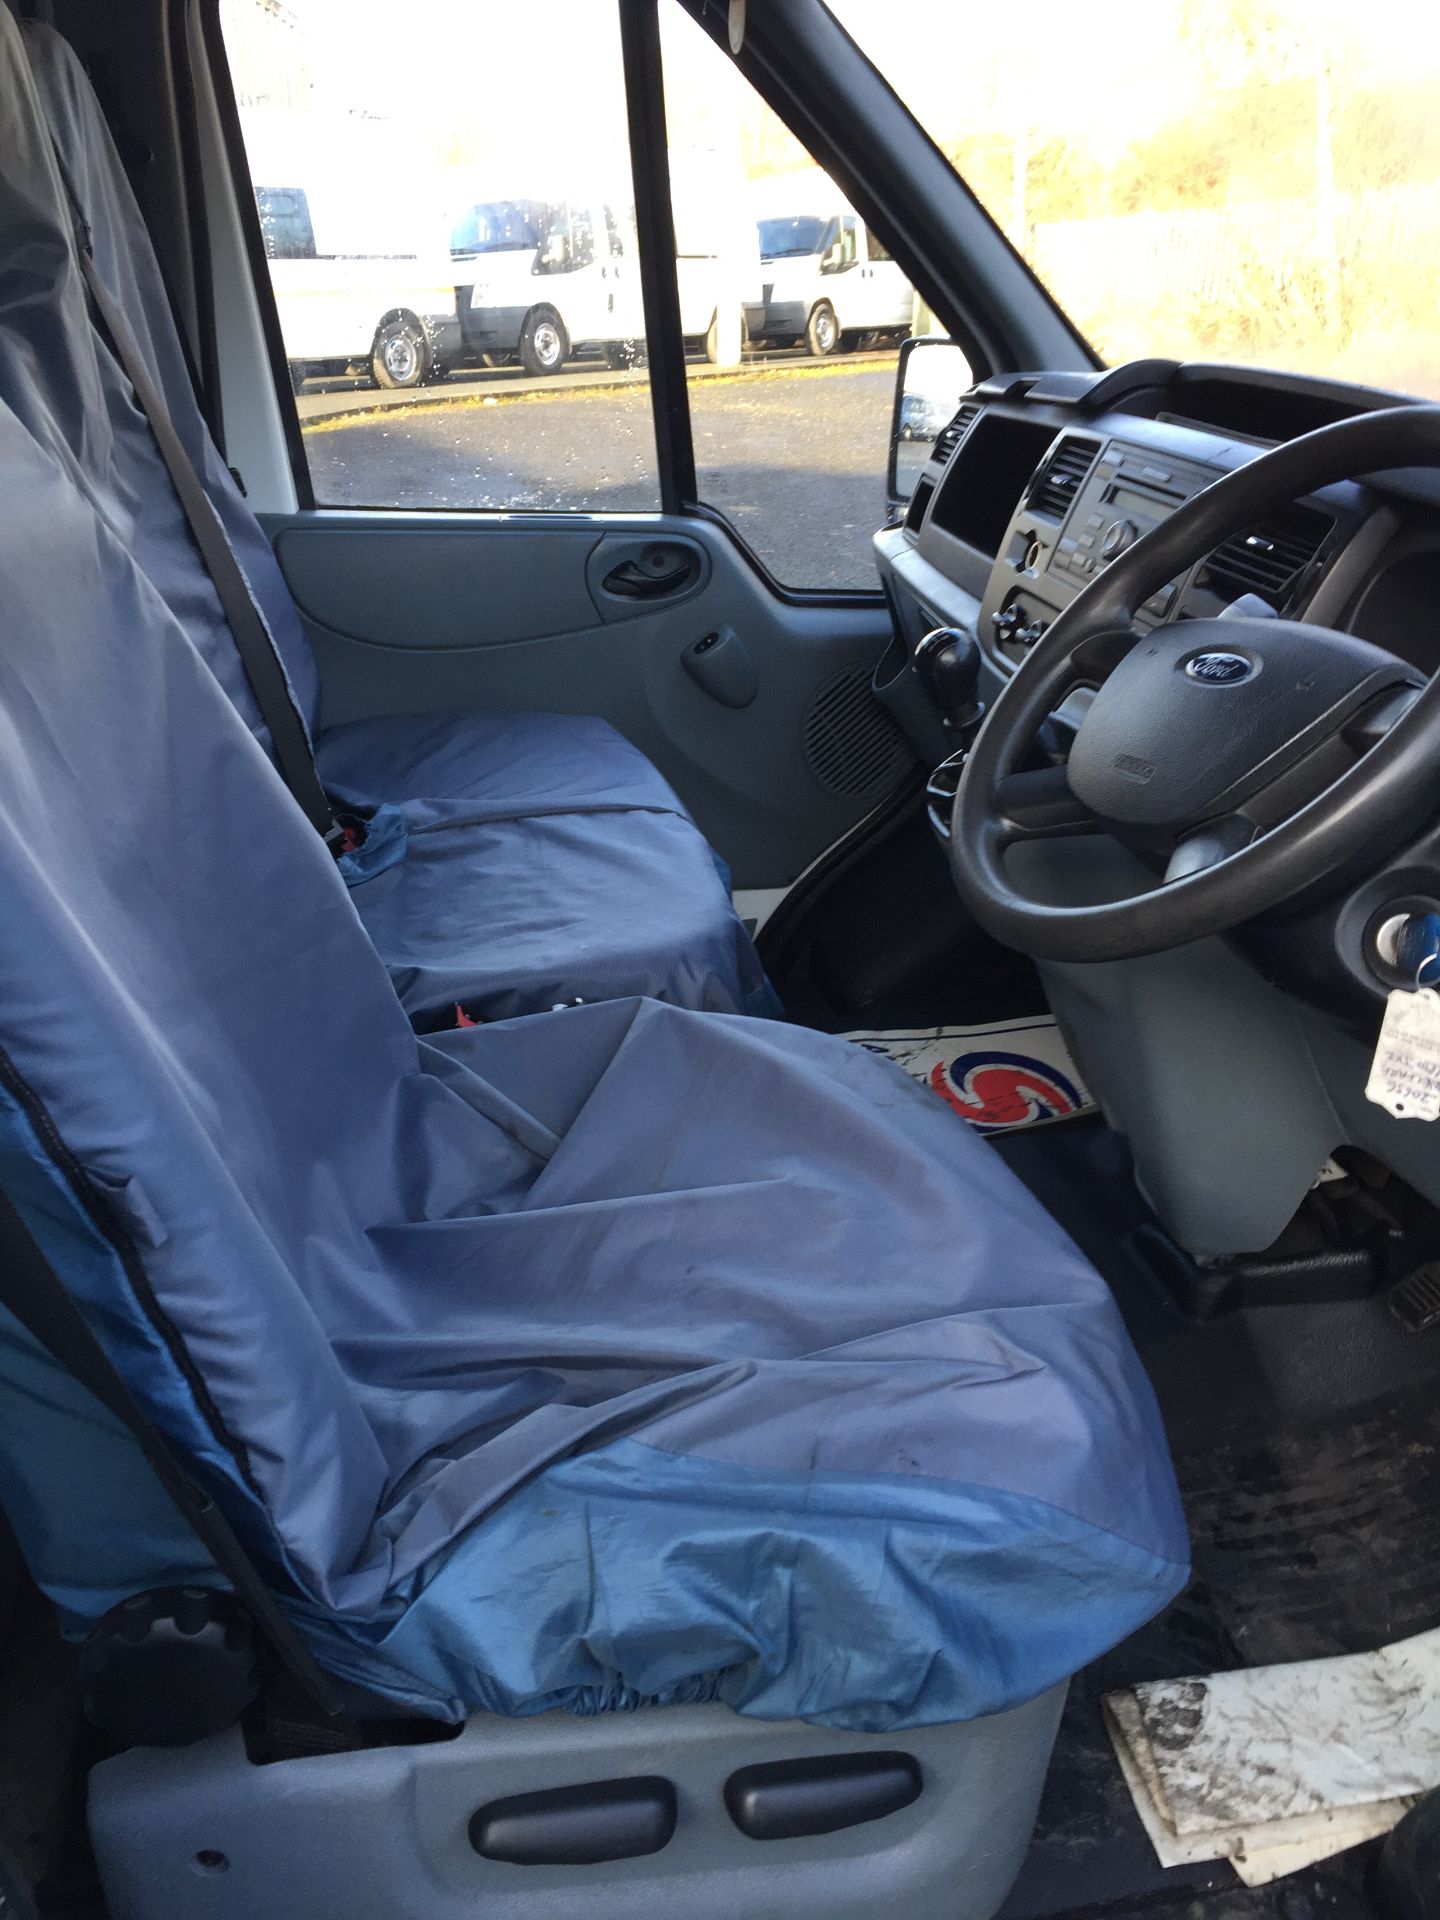 Ford Transit Welfare Van With Seating Area, Cooking Station and Toilet Ex-Commisioned Highway Mainte - Image 8 of 10